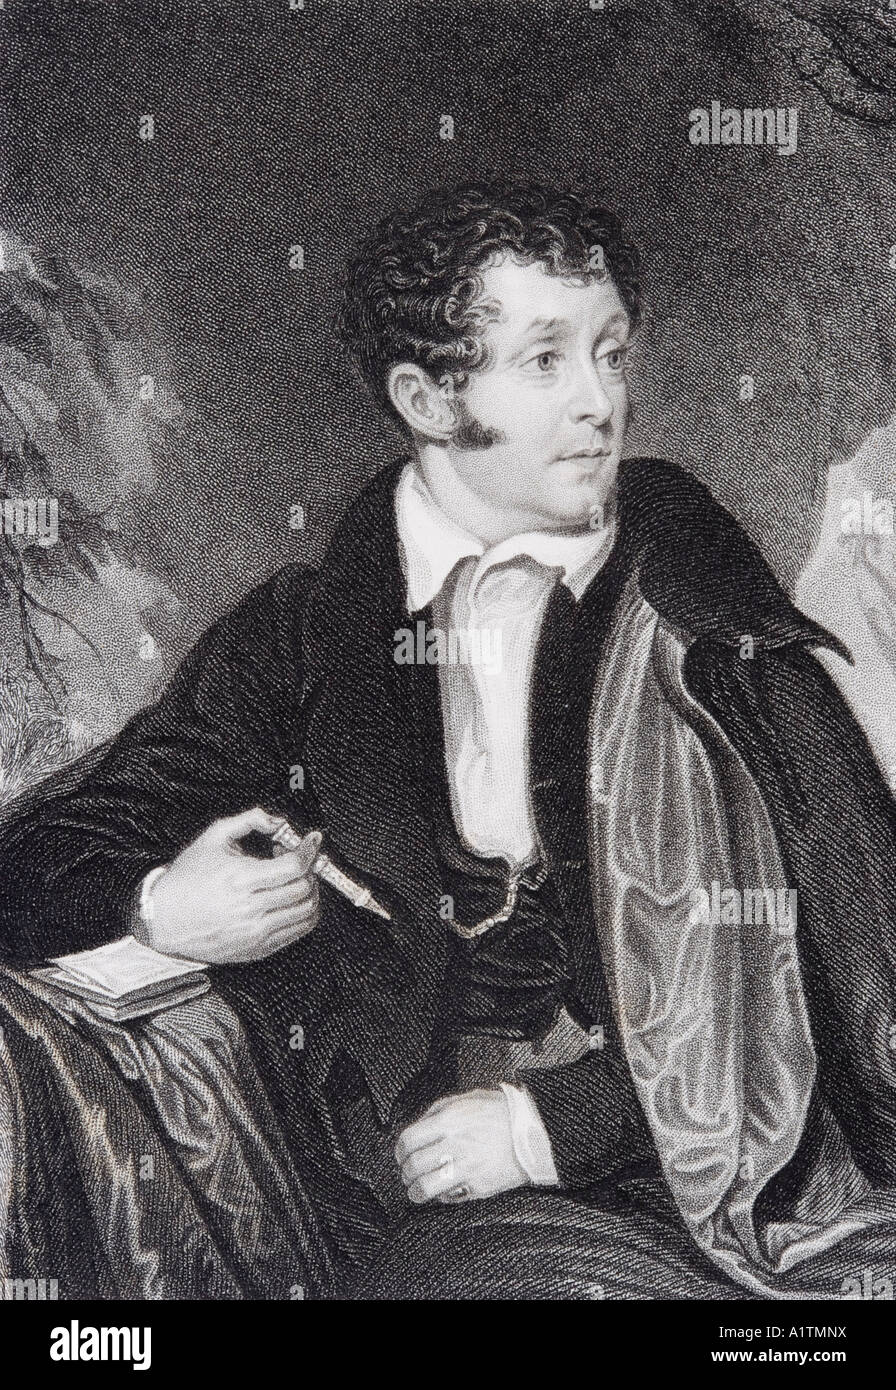 Thomas Campbell, 1777 - 1844. Scottish poet. Author of The Pleasures of Hope. Engraver Joseph Jenkins after D McClise. Stock Photo